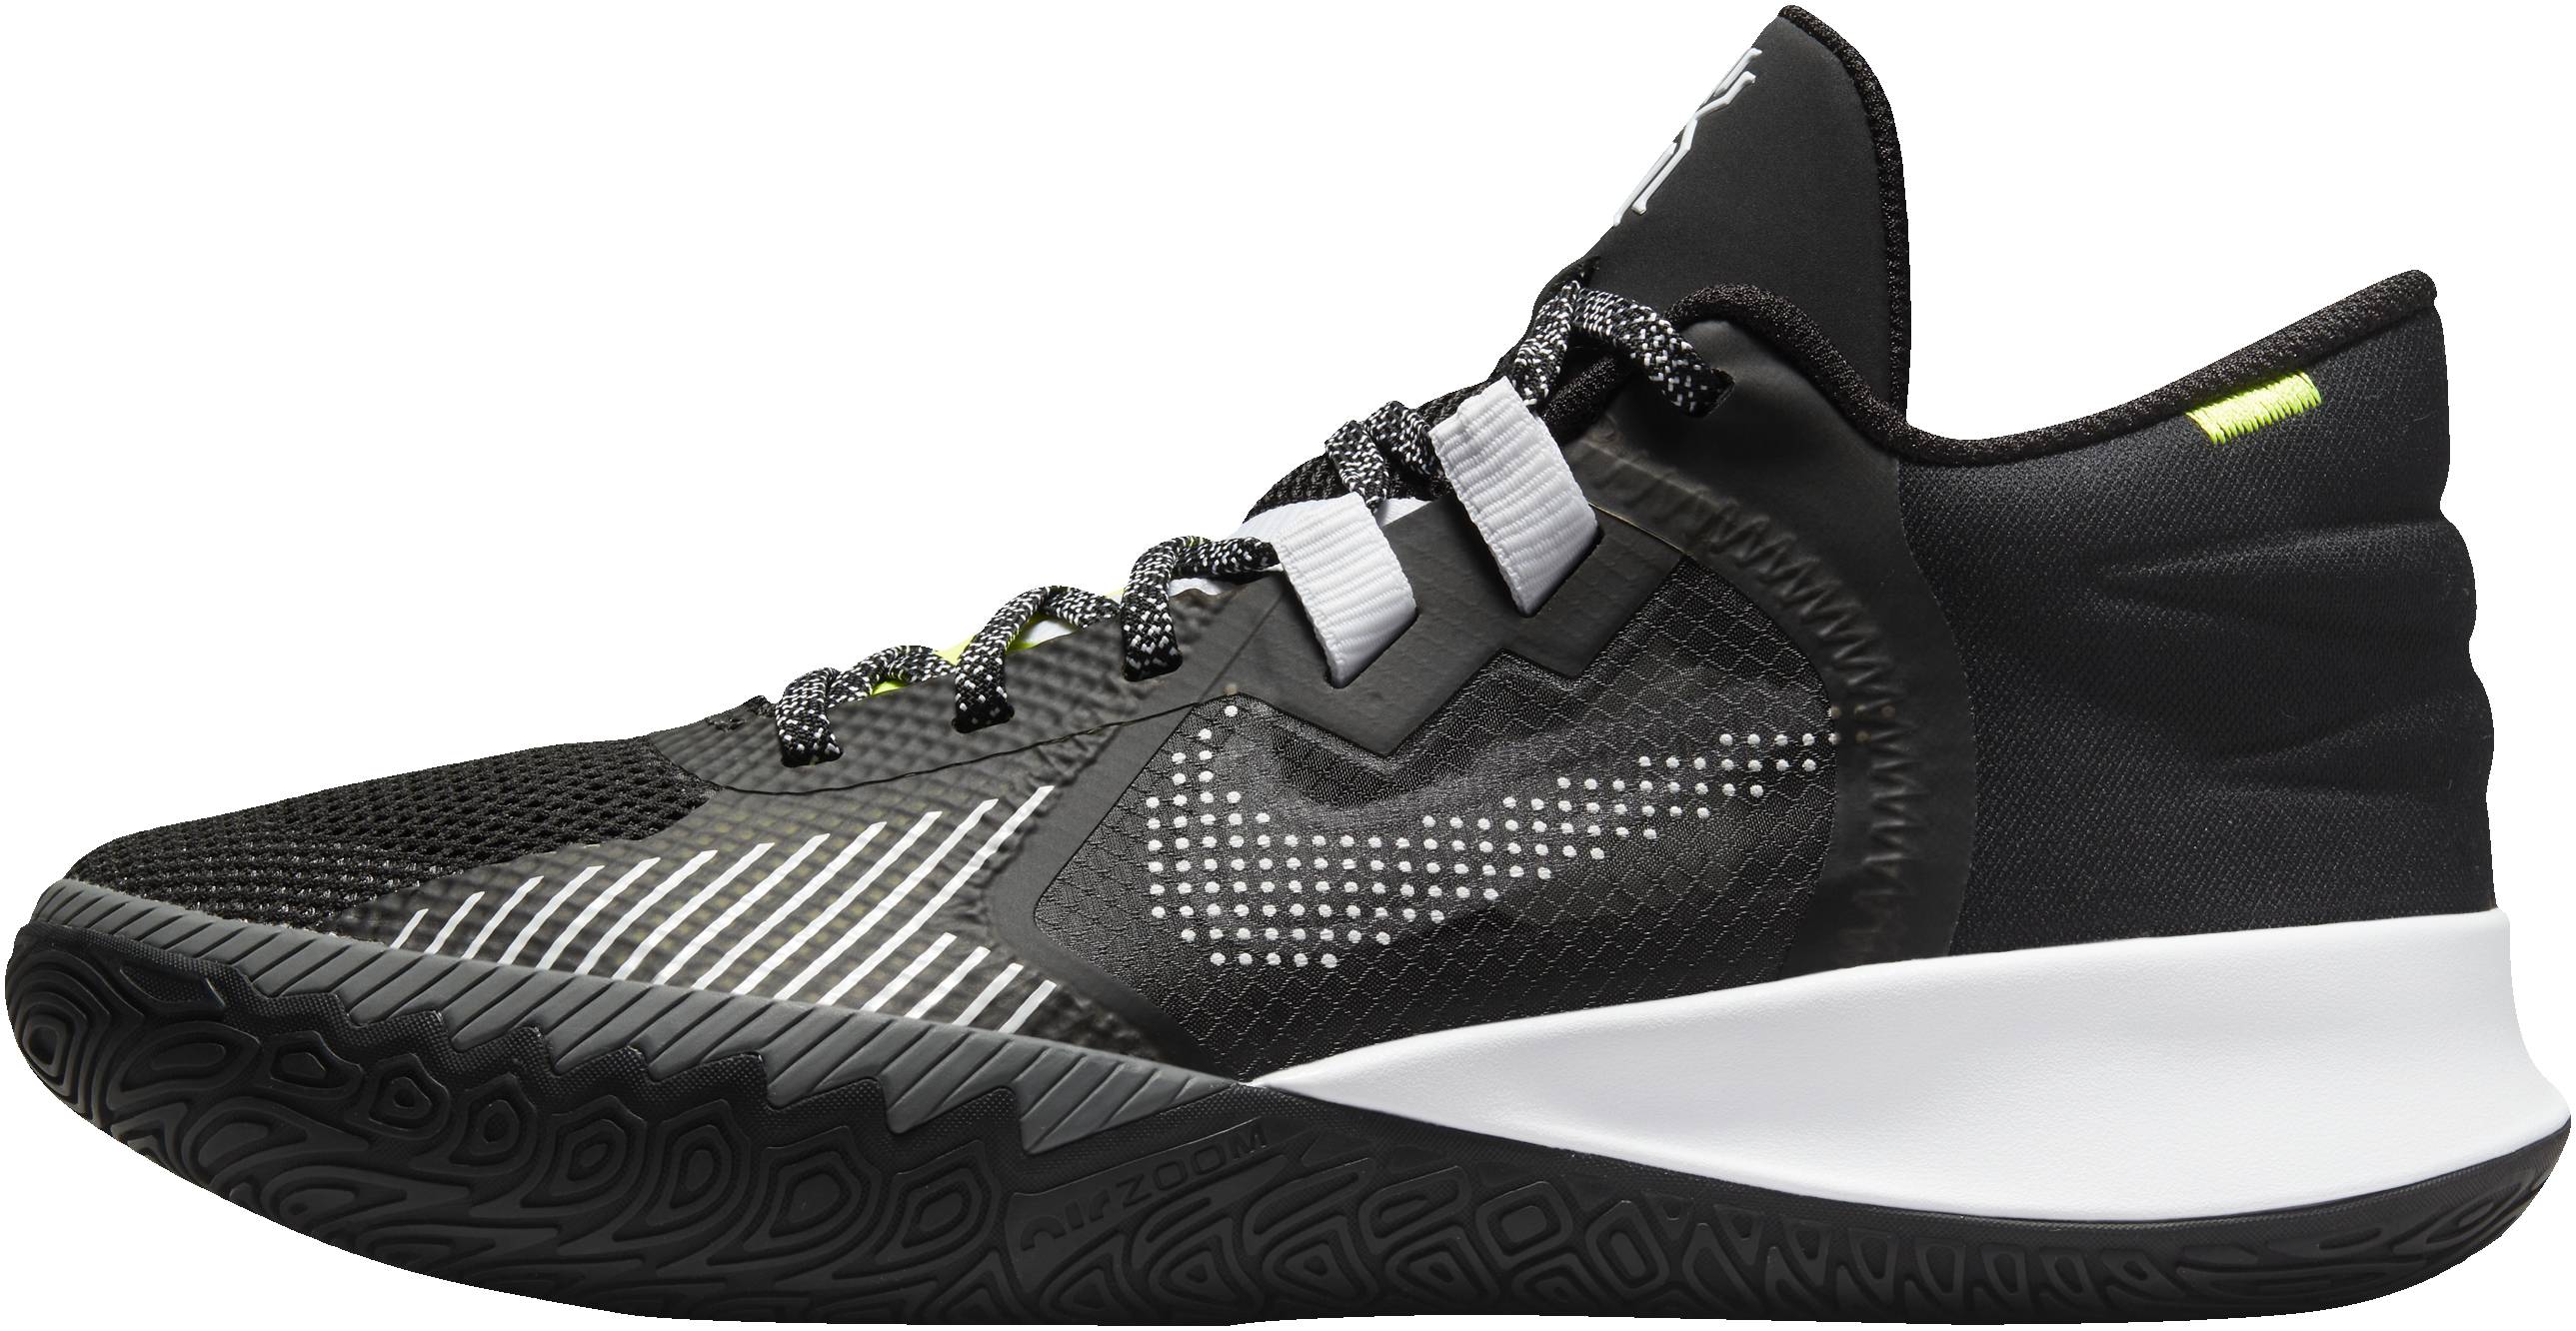 nike-kyrie-flytrap-5-basketball-shoes-black-anthracite-cool-grey-white-adult-black-anthracite-cool-grey-white-1fd9-main.jpg